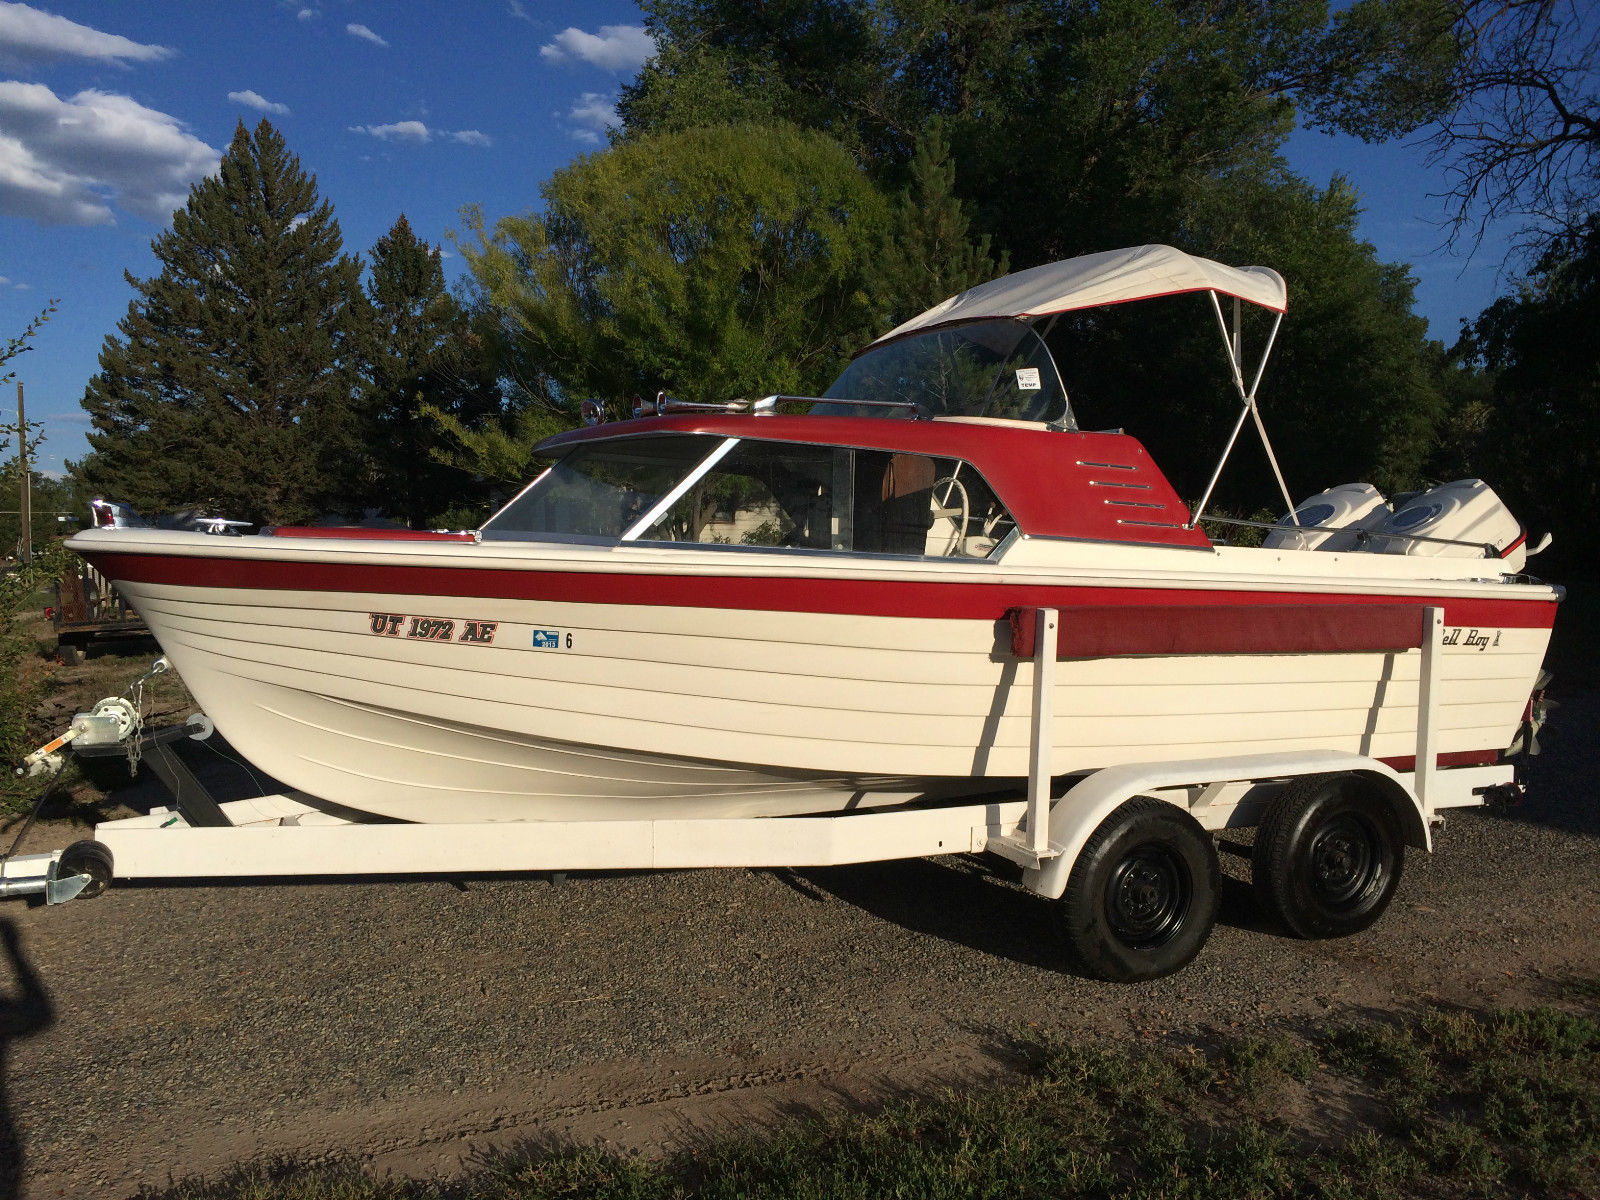 bell boy cabin cruiser 1966 for sale for $5,300 - boats